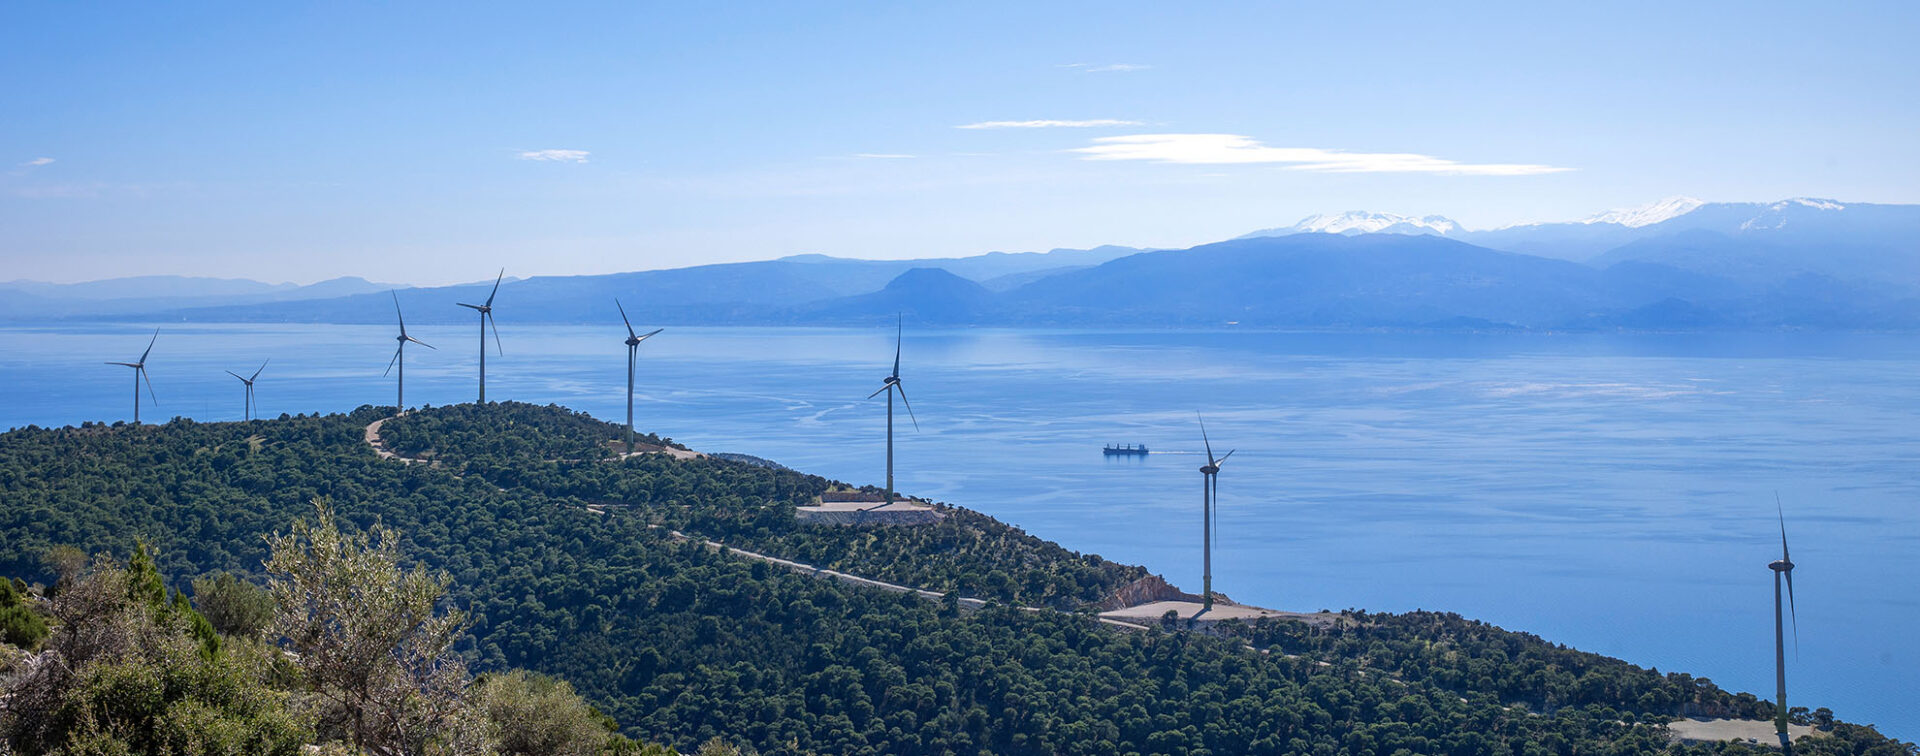 Windfarm with 8 windmills on green hills in front of the sea with hazy mountains in the back and blue sky.